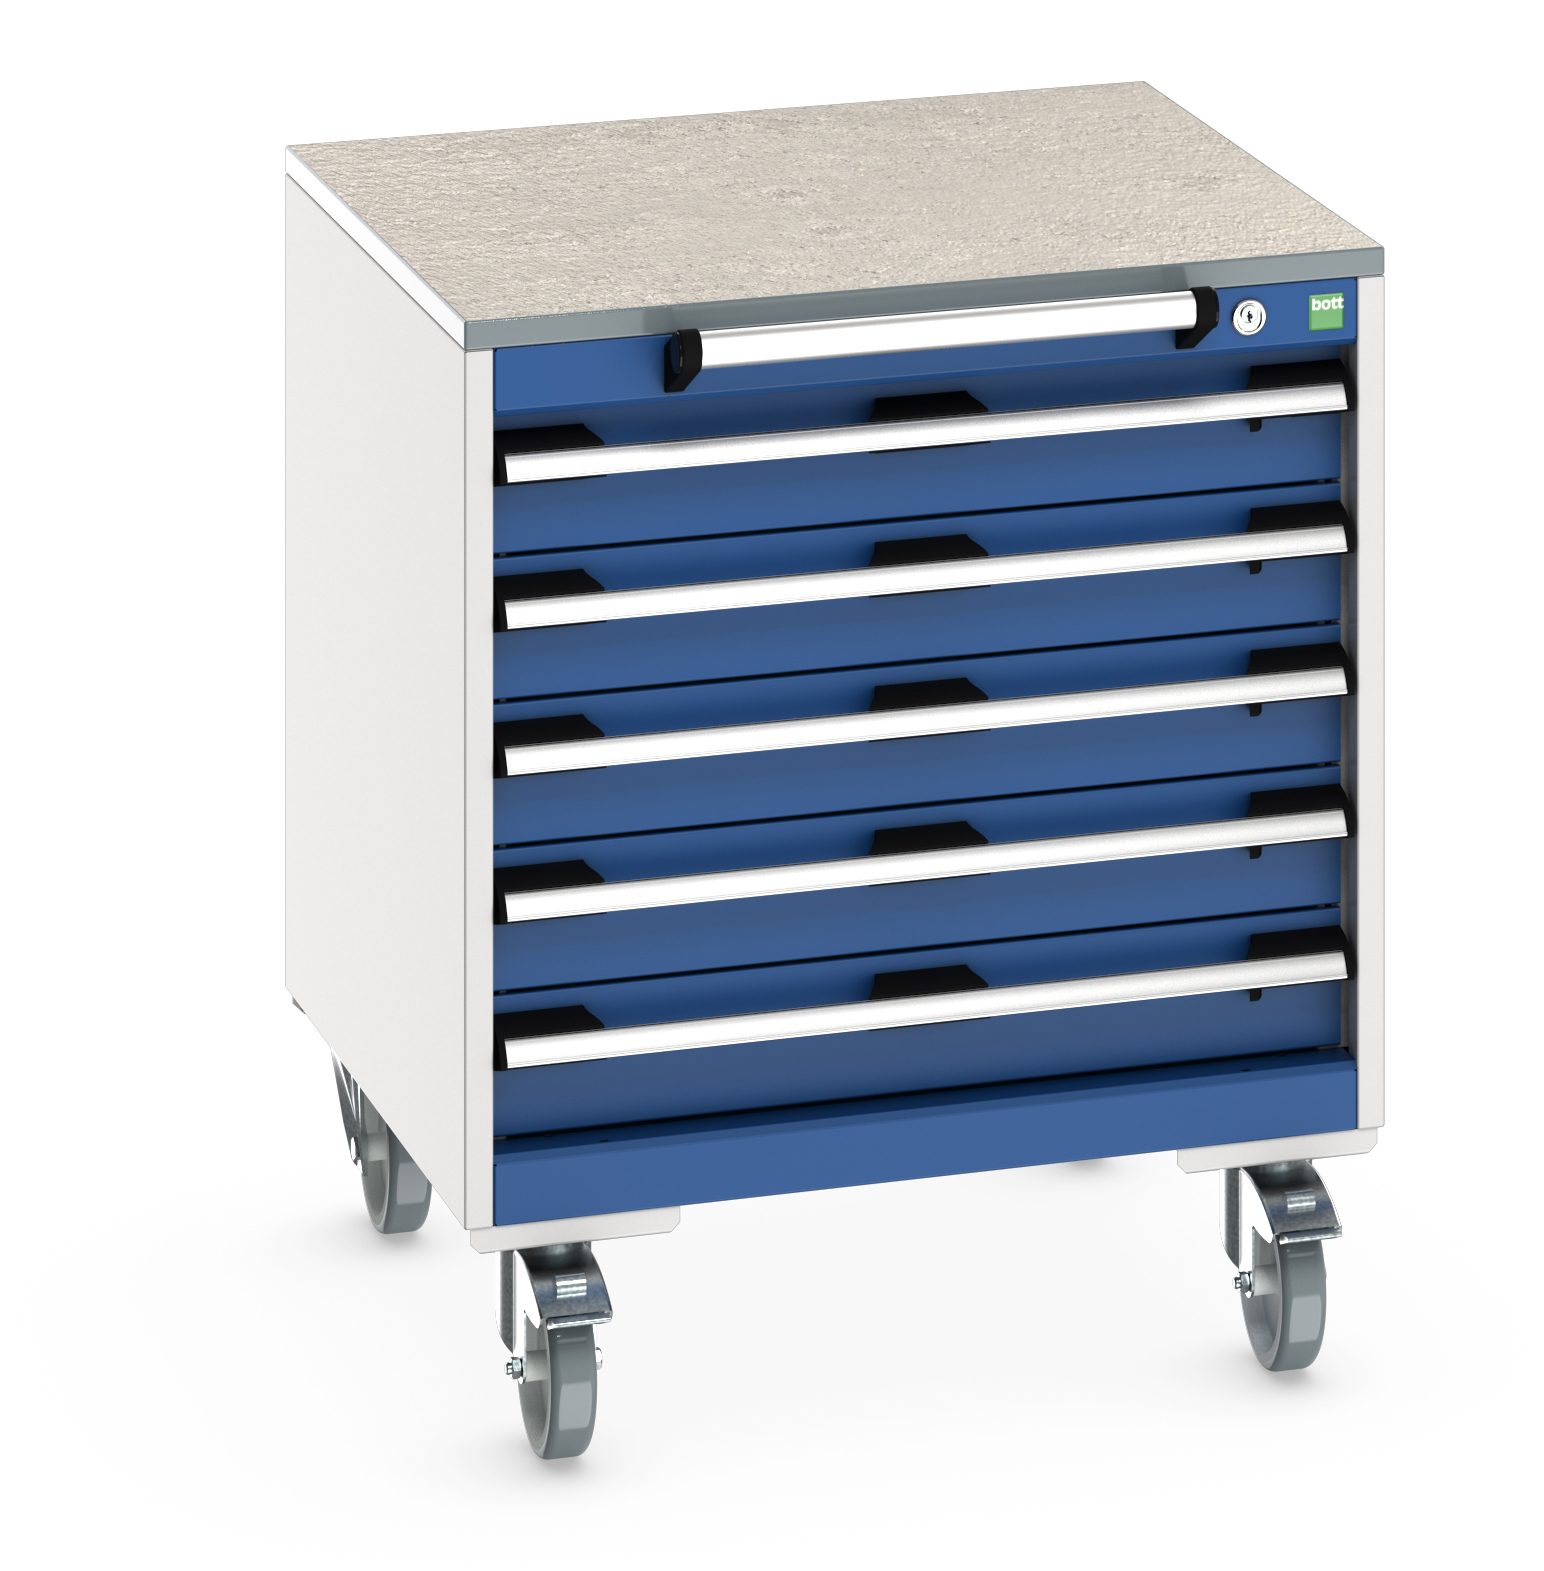 Bott Cubio Mobile Drawer Cabinet With 5 Drawers & Lino Worktop - 40402146.11V